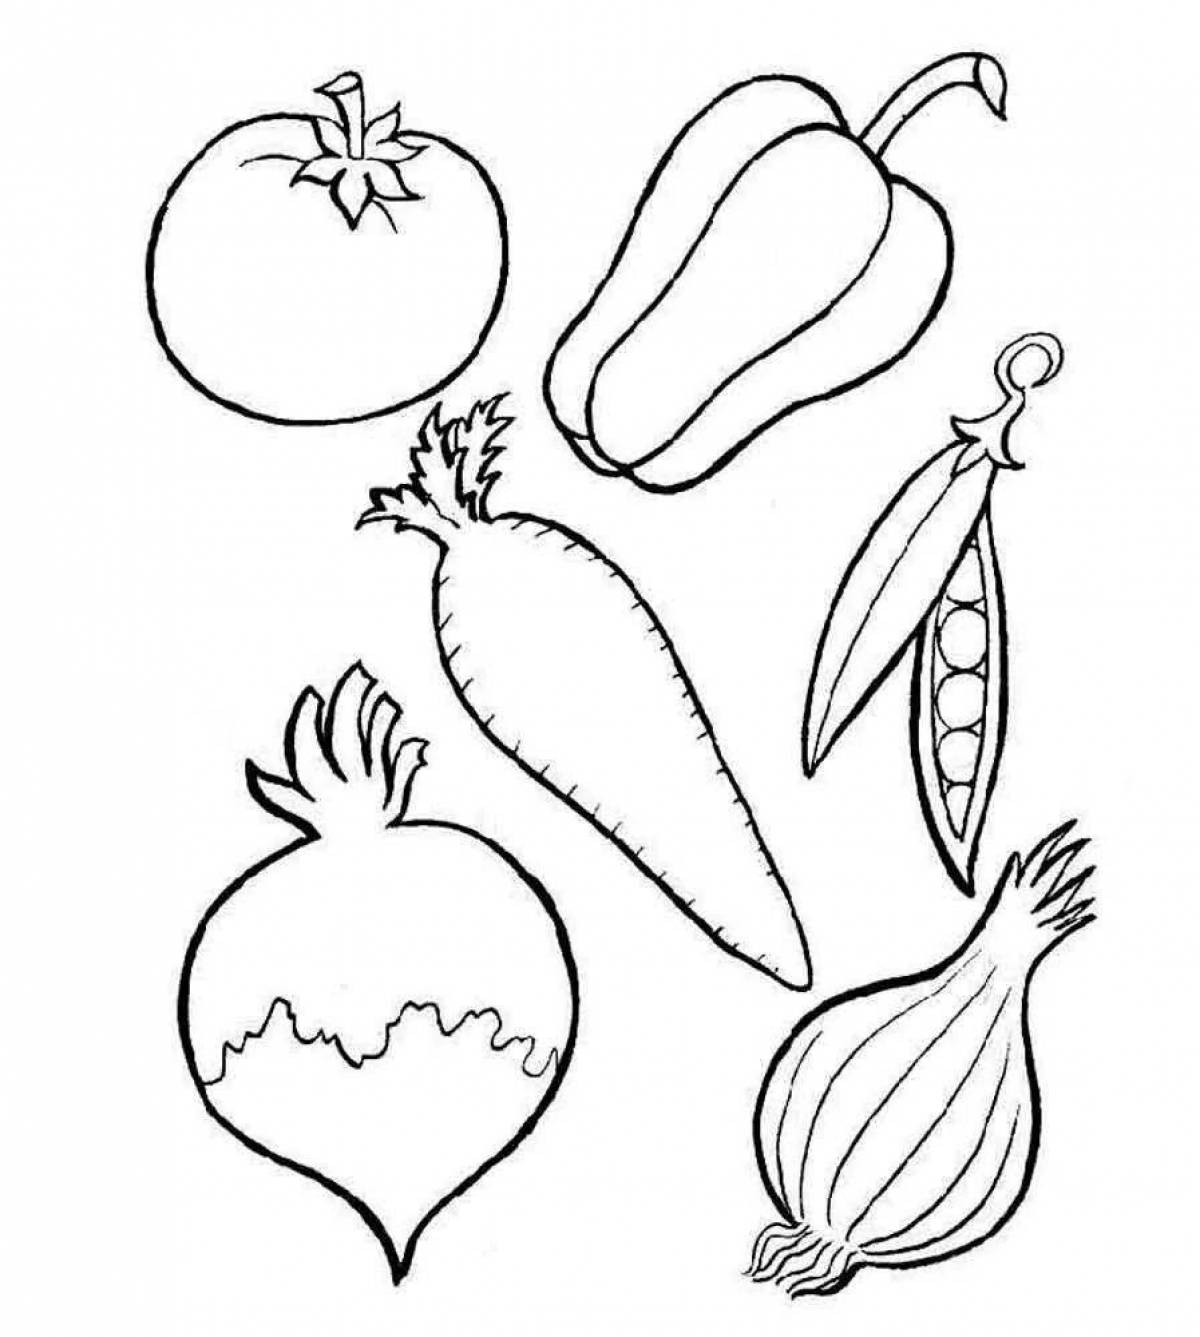 Fancy vegetable coloring book for kids